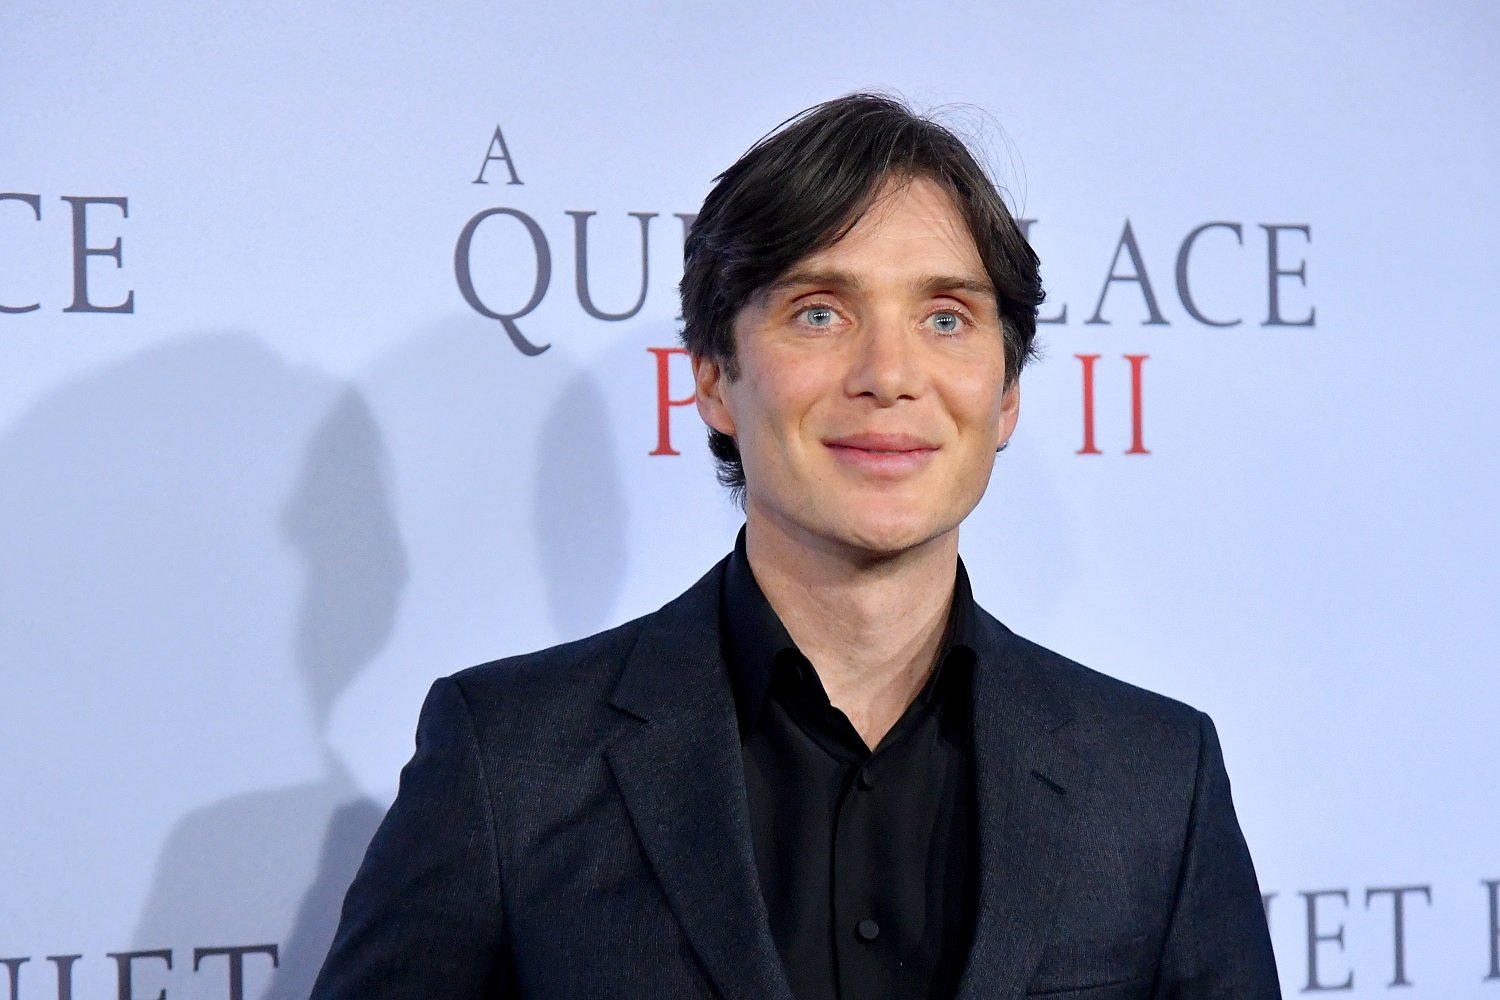 Actor Cillian Murphy poses for photographers at the premiere of 'A Quiet Place Part II.'